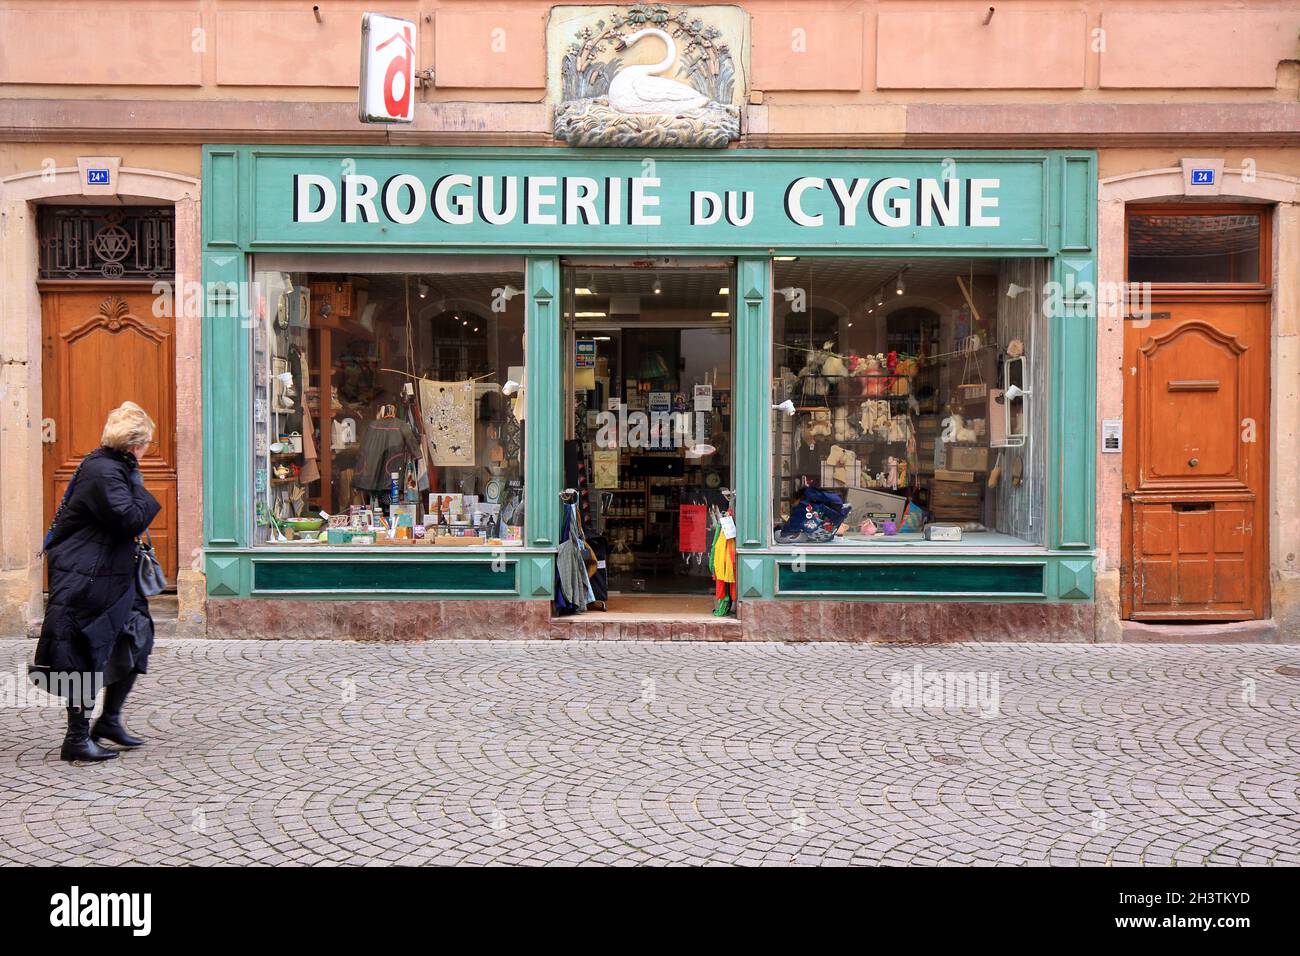 Droguerie du Cygne, 24 Grand Rue, Strasbourg, France. exterior storefront of a home goods, and gift shop. Stock Photo